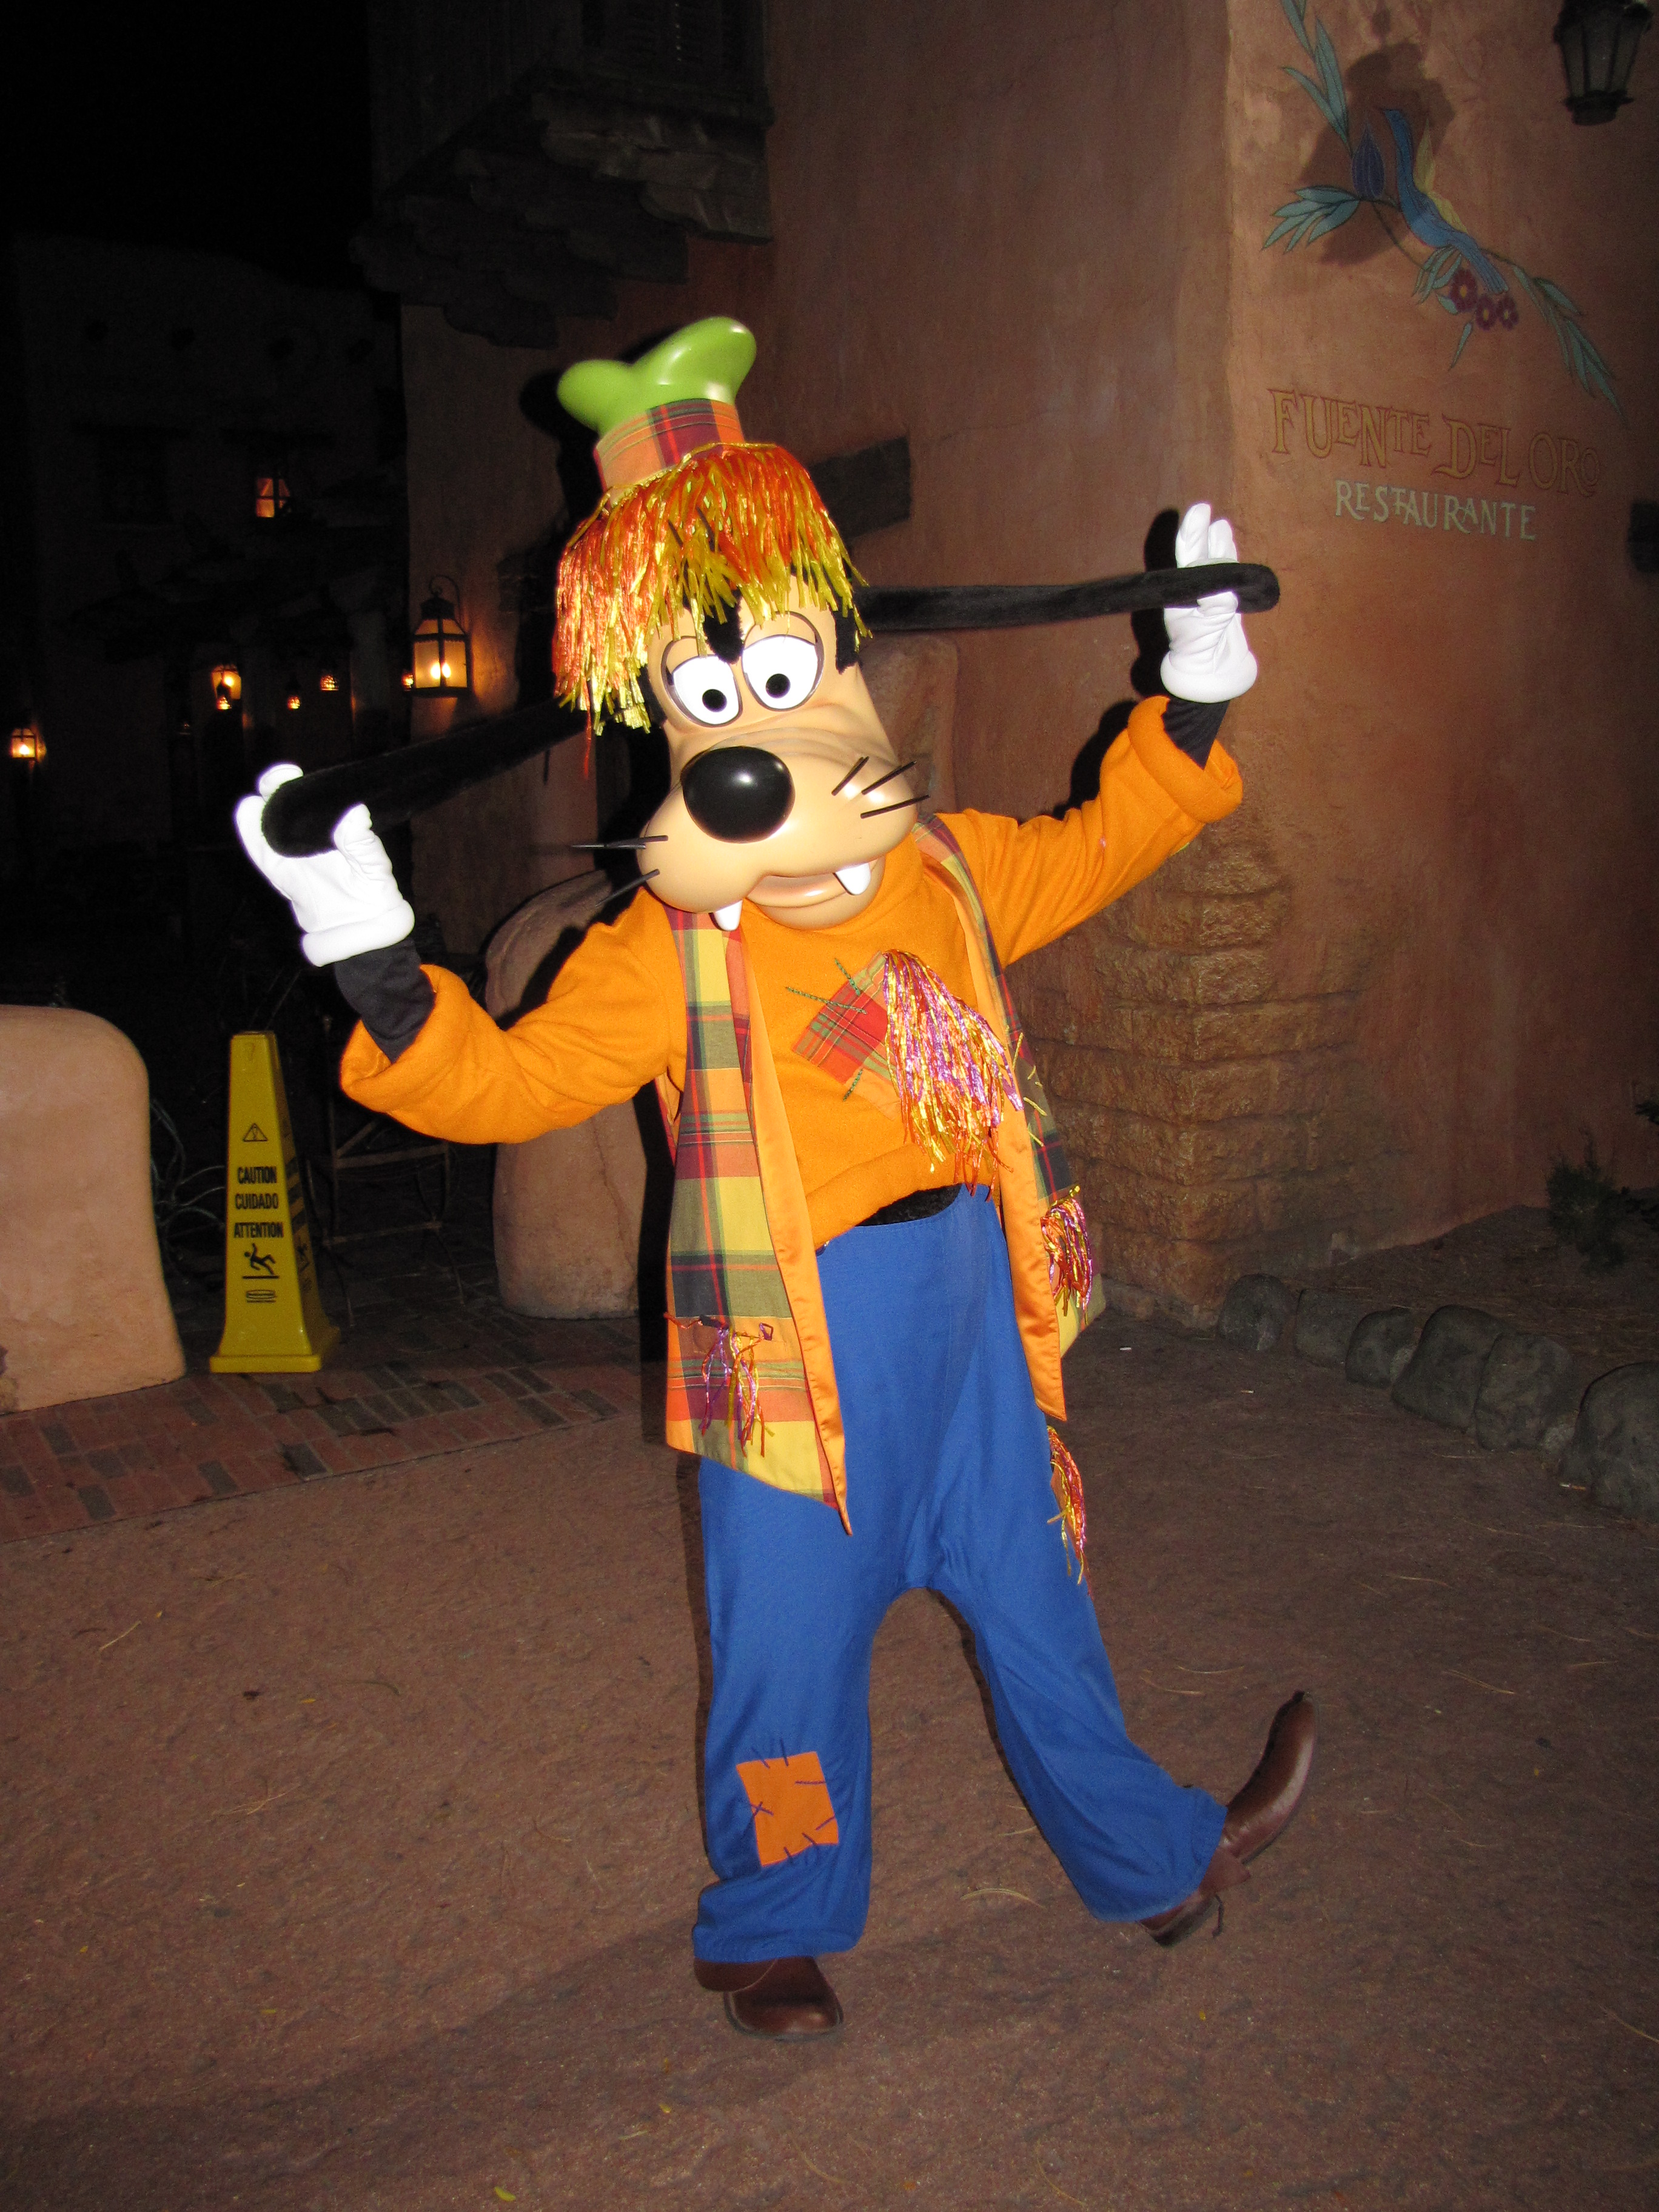 During the Mickey's Not So Scary Halloween Parties in 2009 Goofy wore his scarecrow outfit.